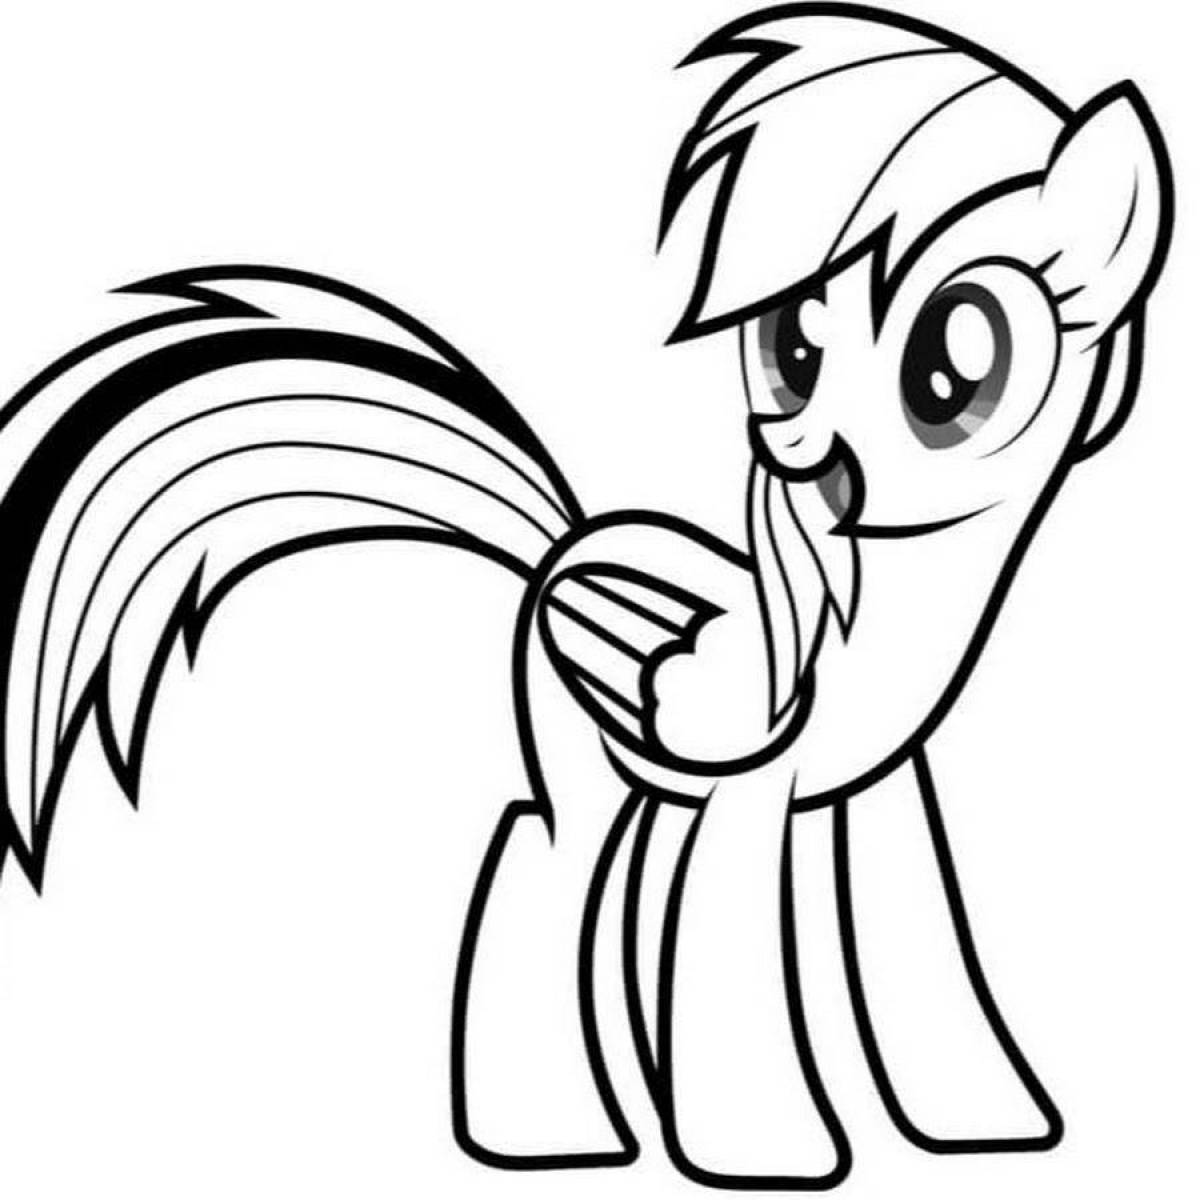 Coloring page shining rainbow pony